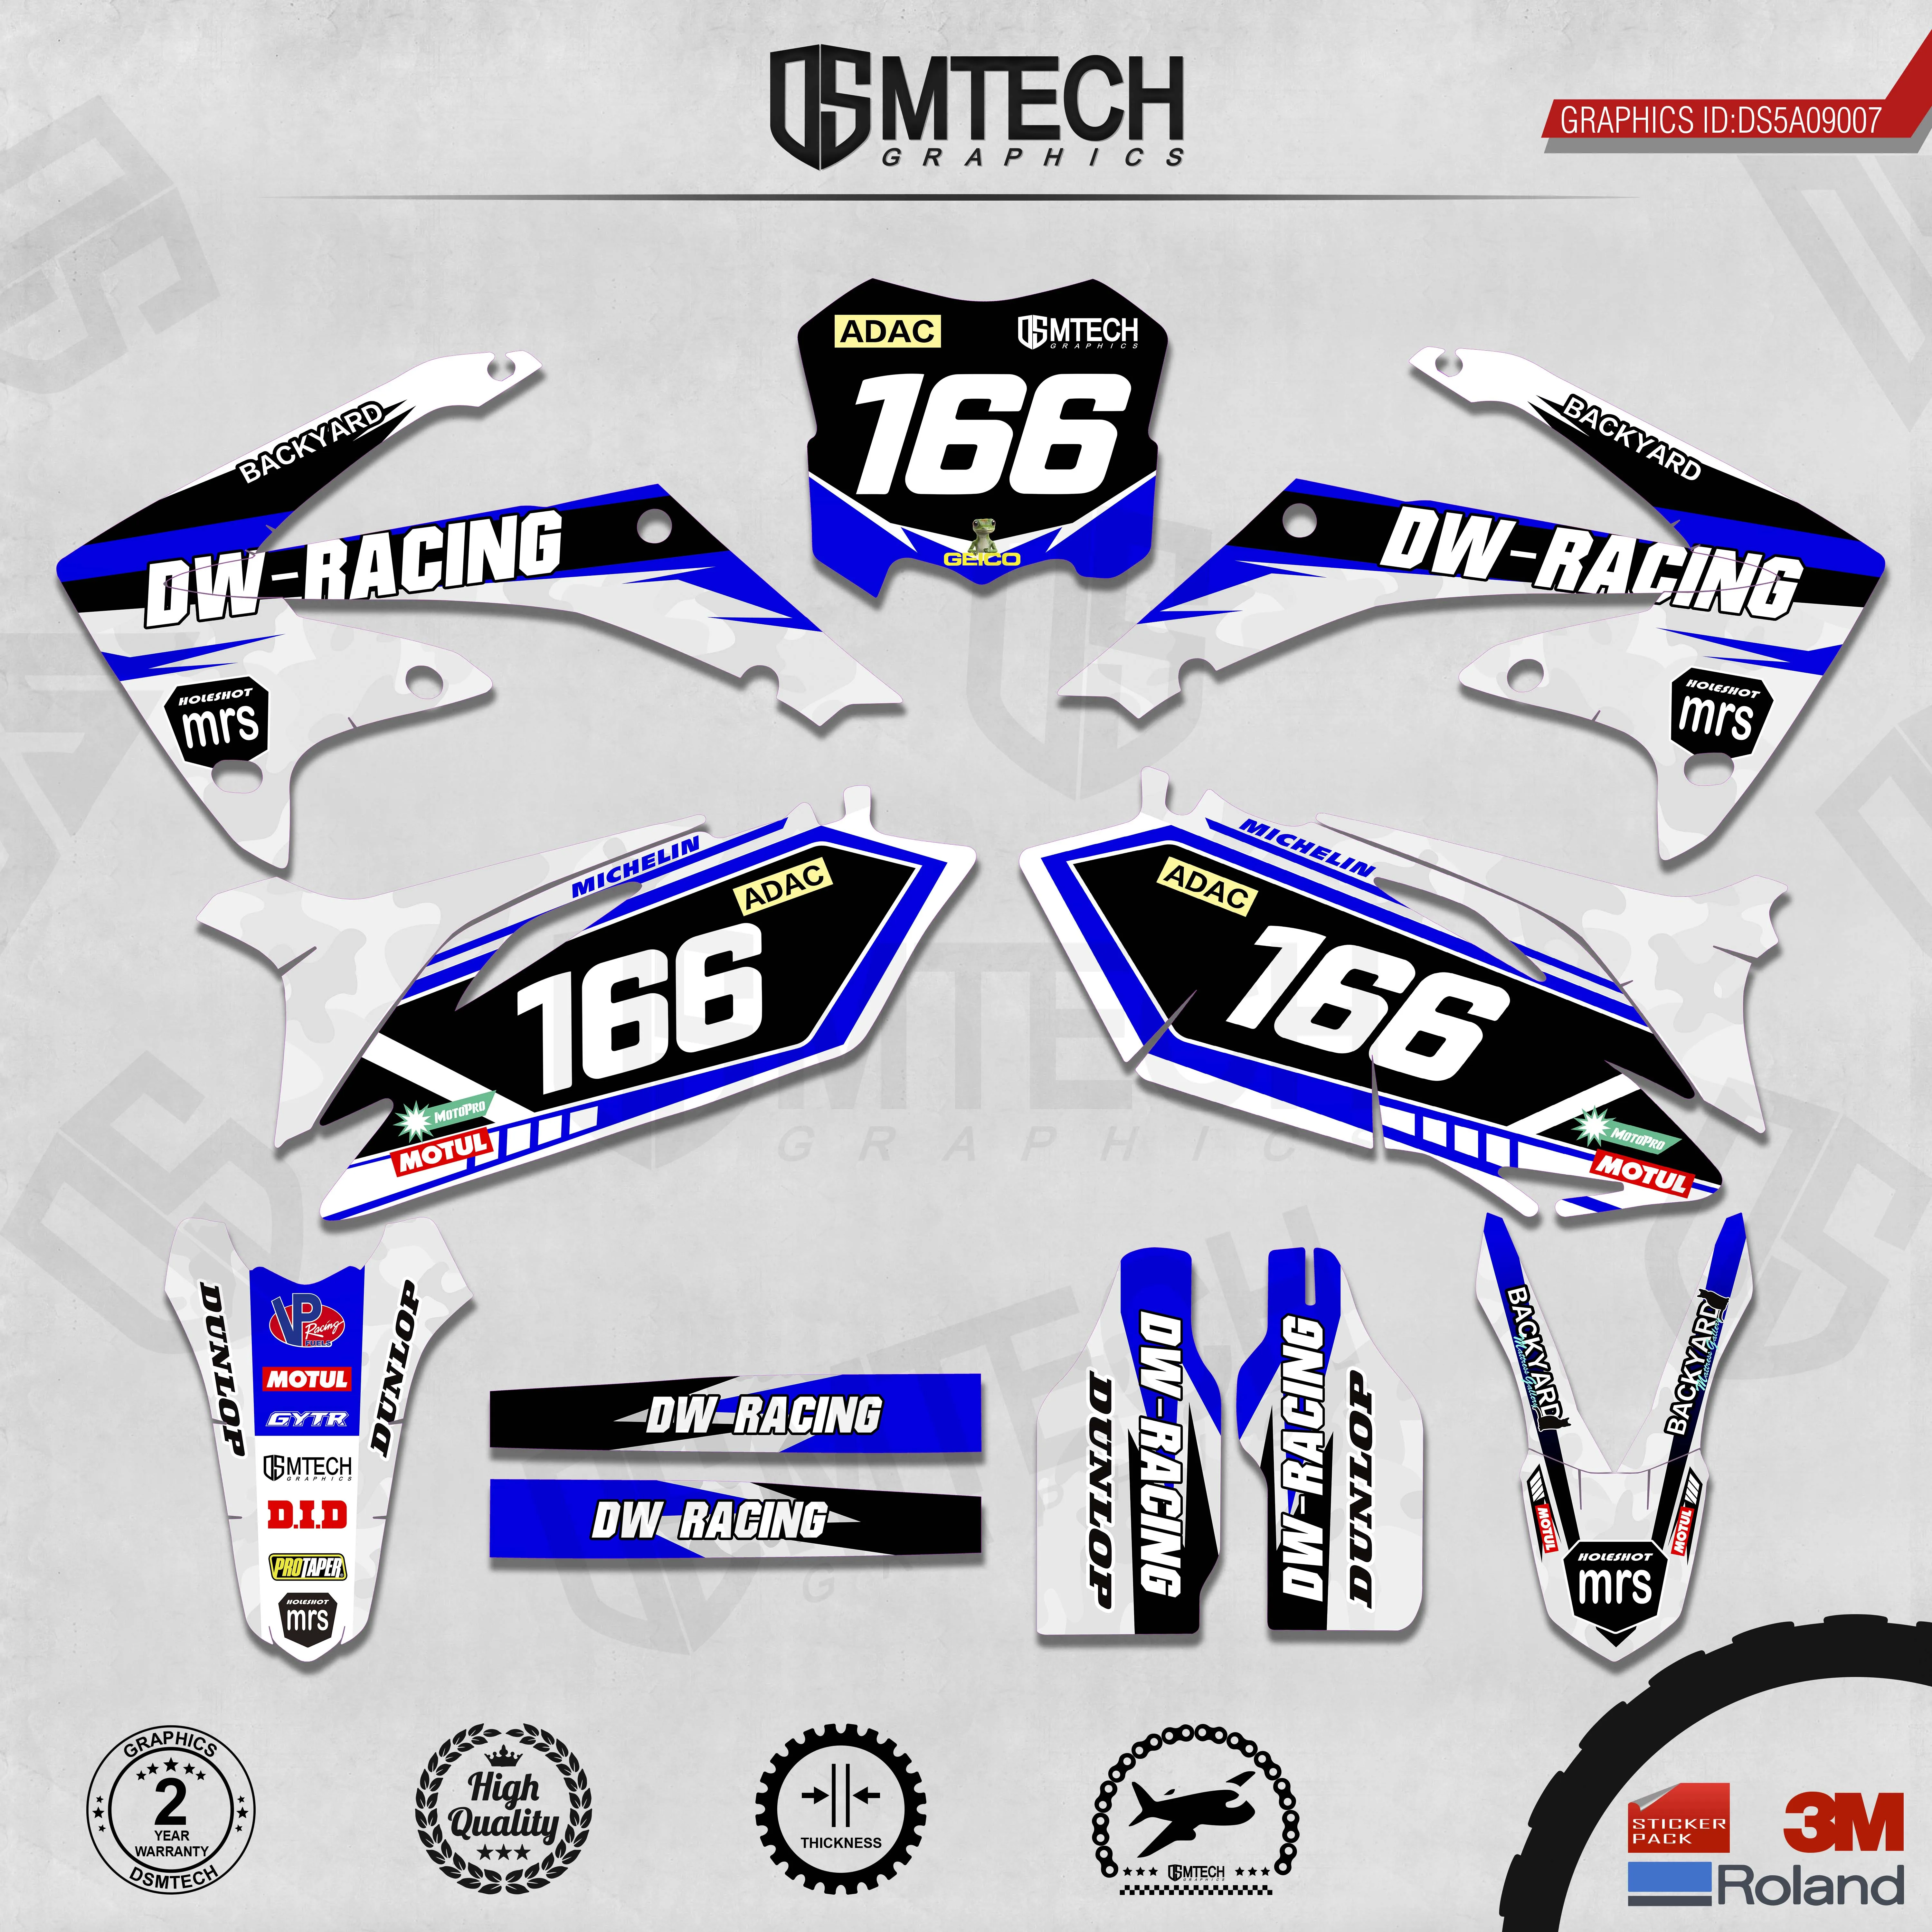 DSMTECH Customized Team Graphics Backgrounds Decals 3M Custom Stickers For 2010-2013 CRF250R 2009-2012 CRF450R 007